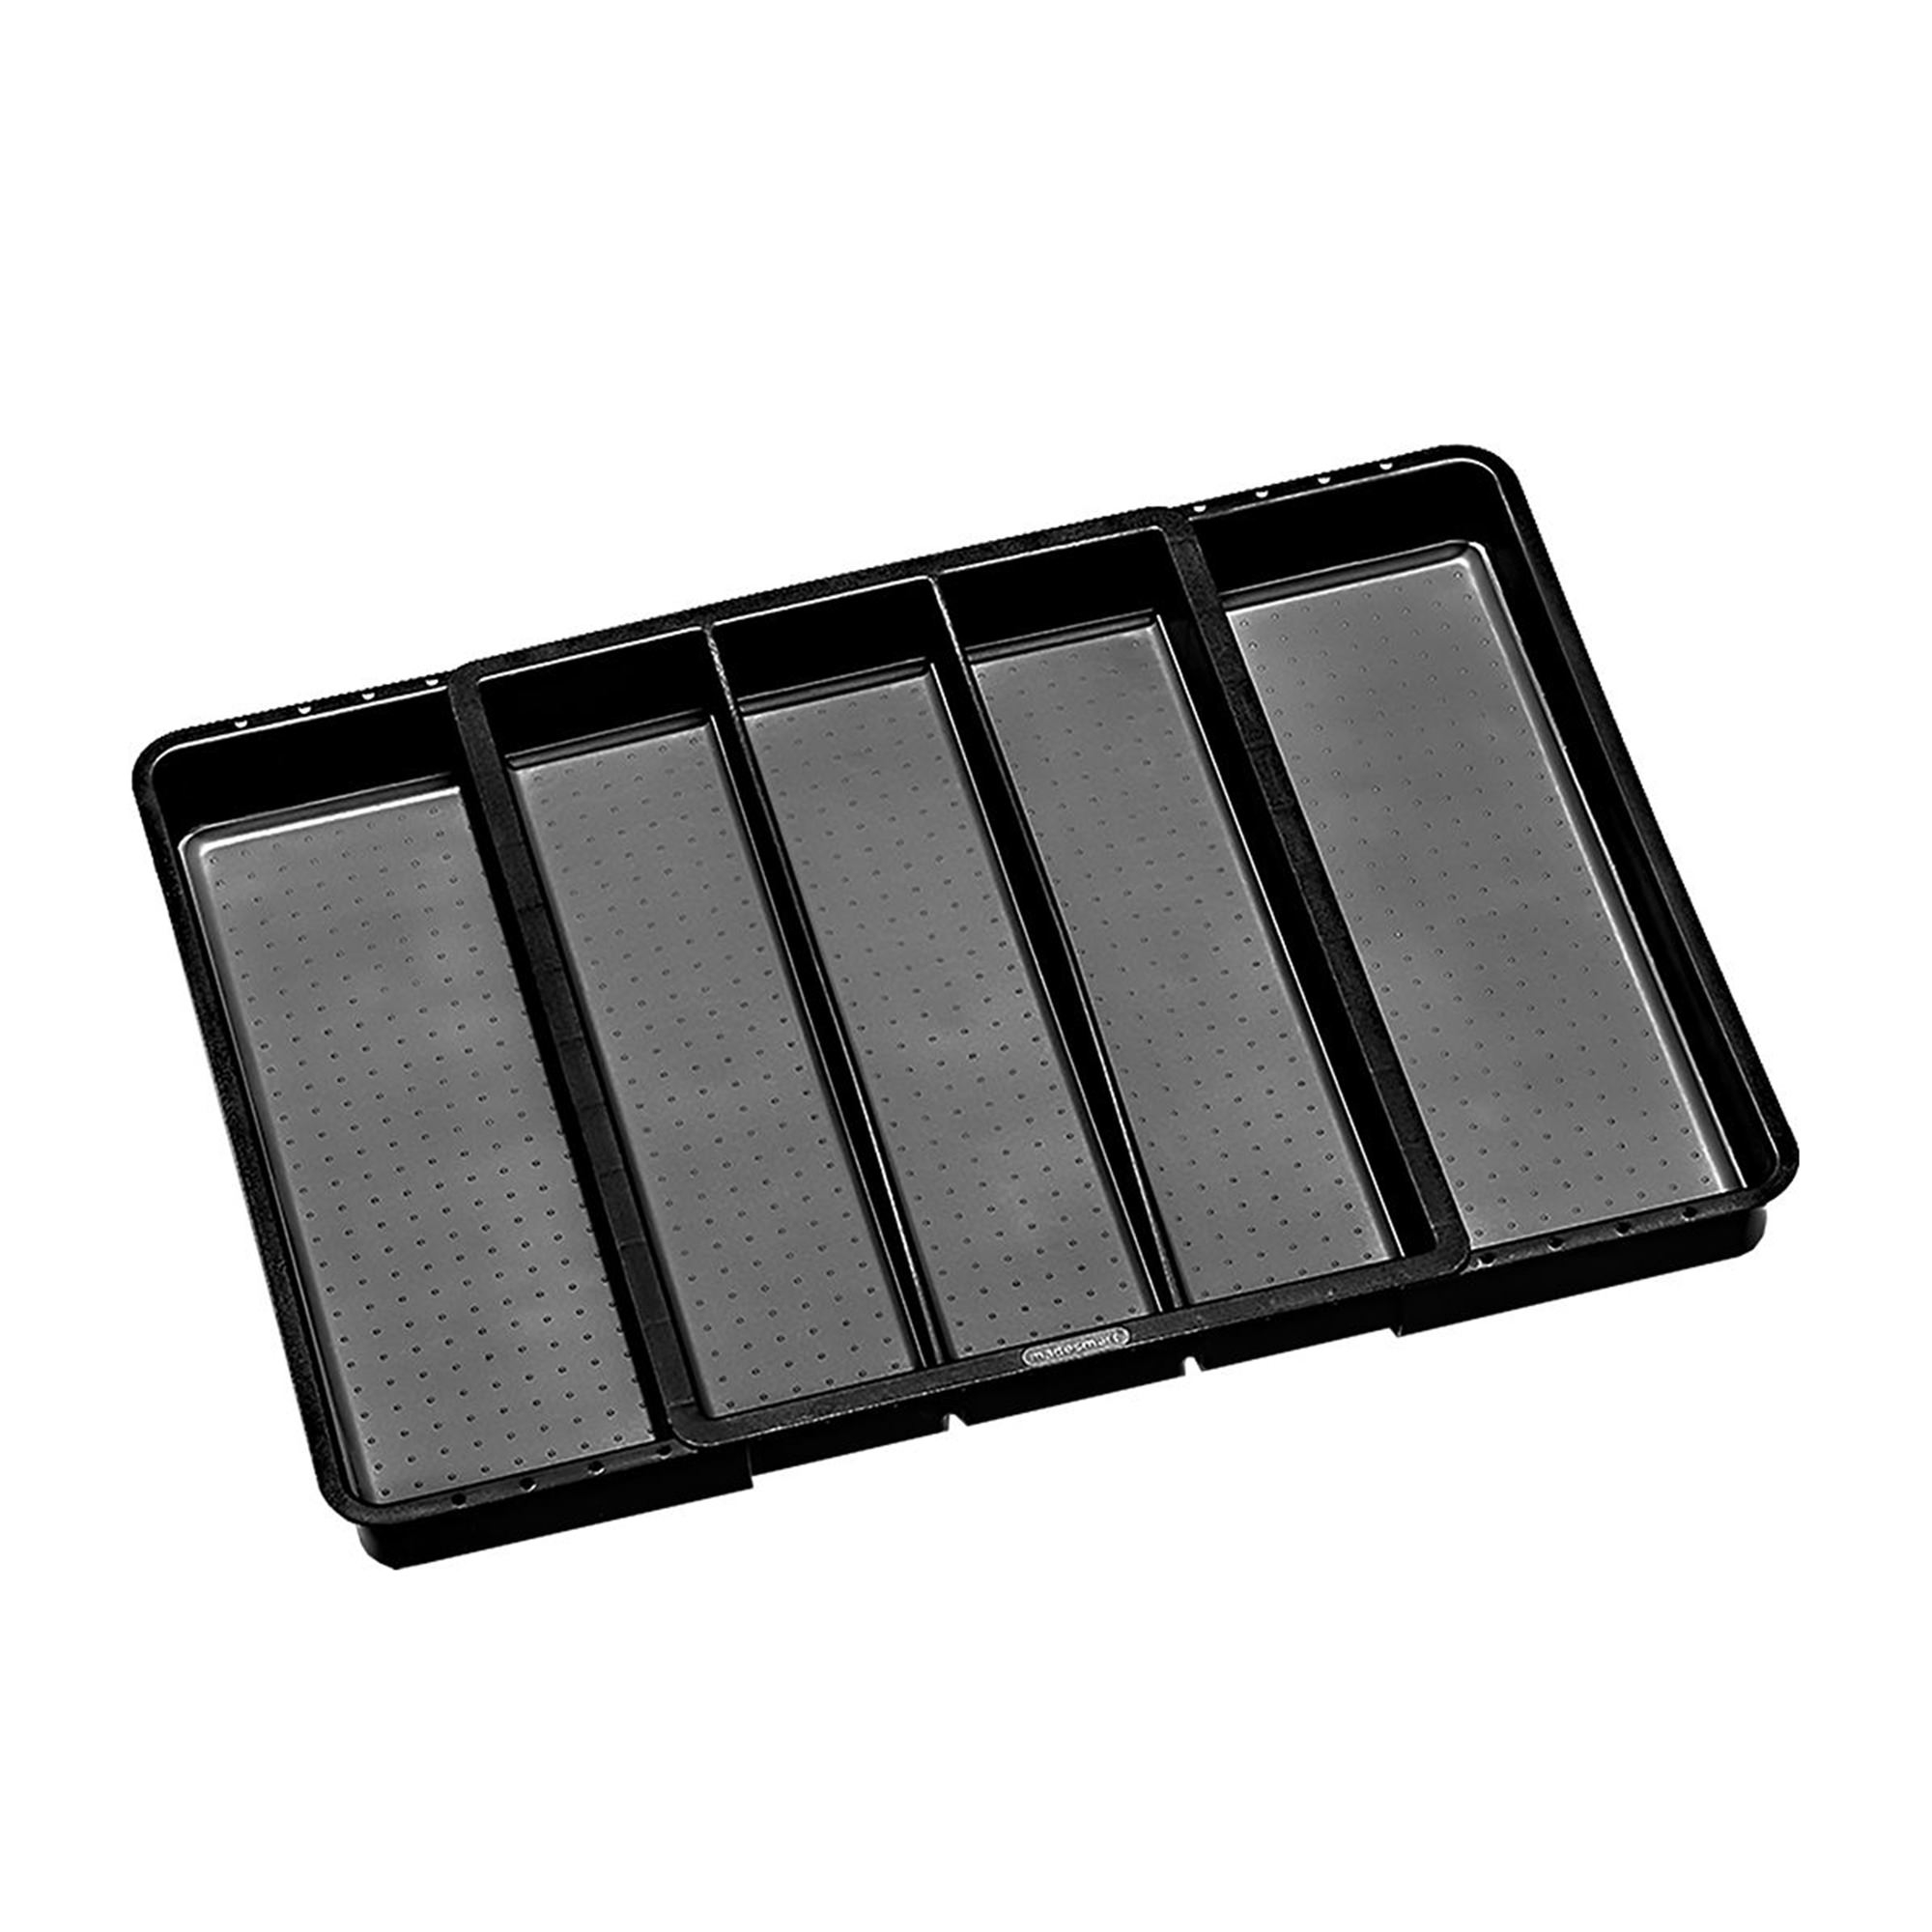 Madesmart Expandable Utensil Tray Carbon Image 2